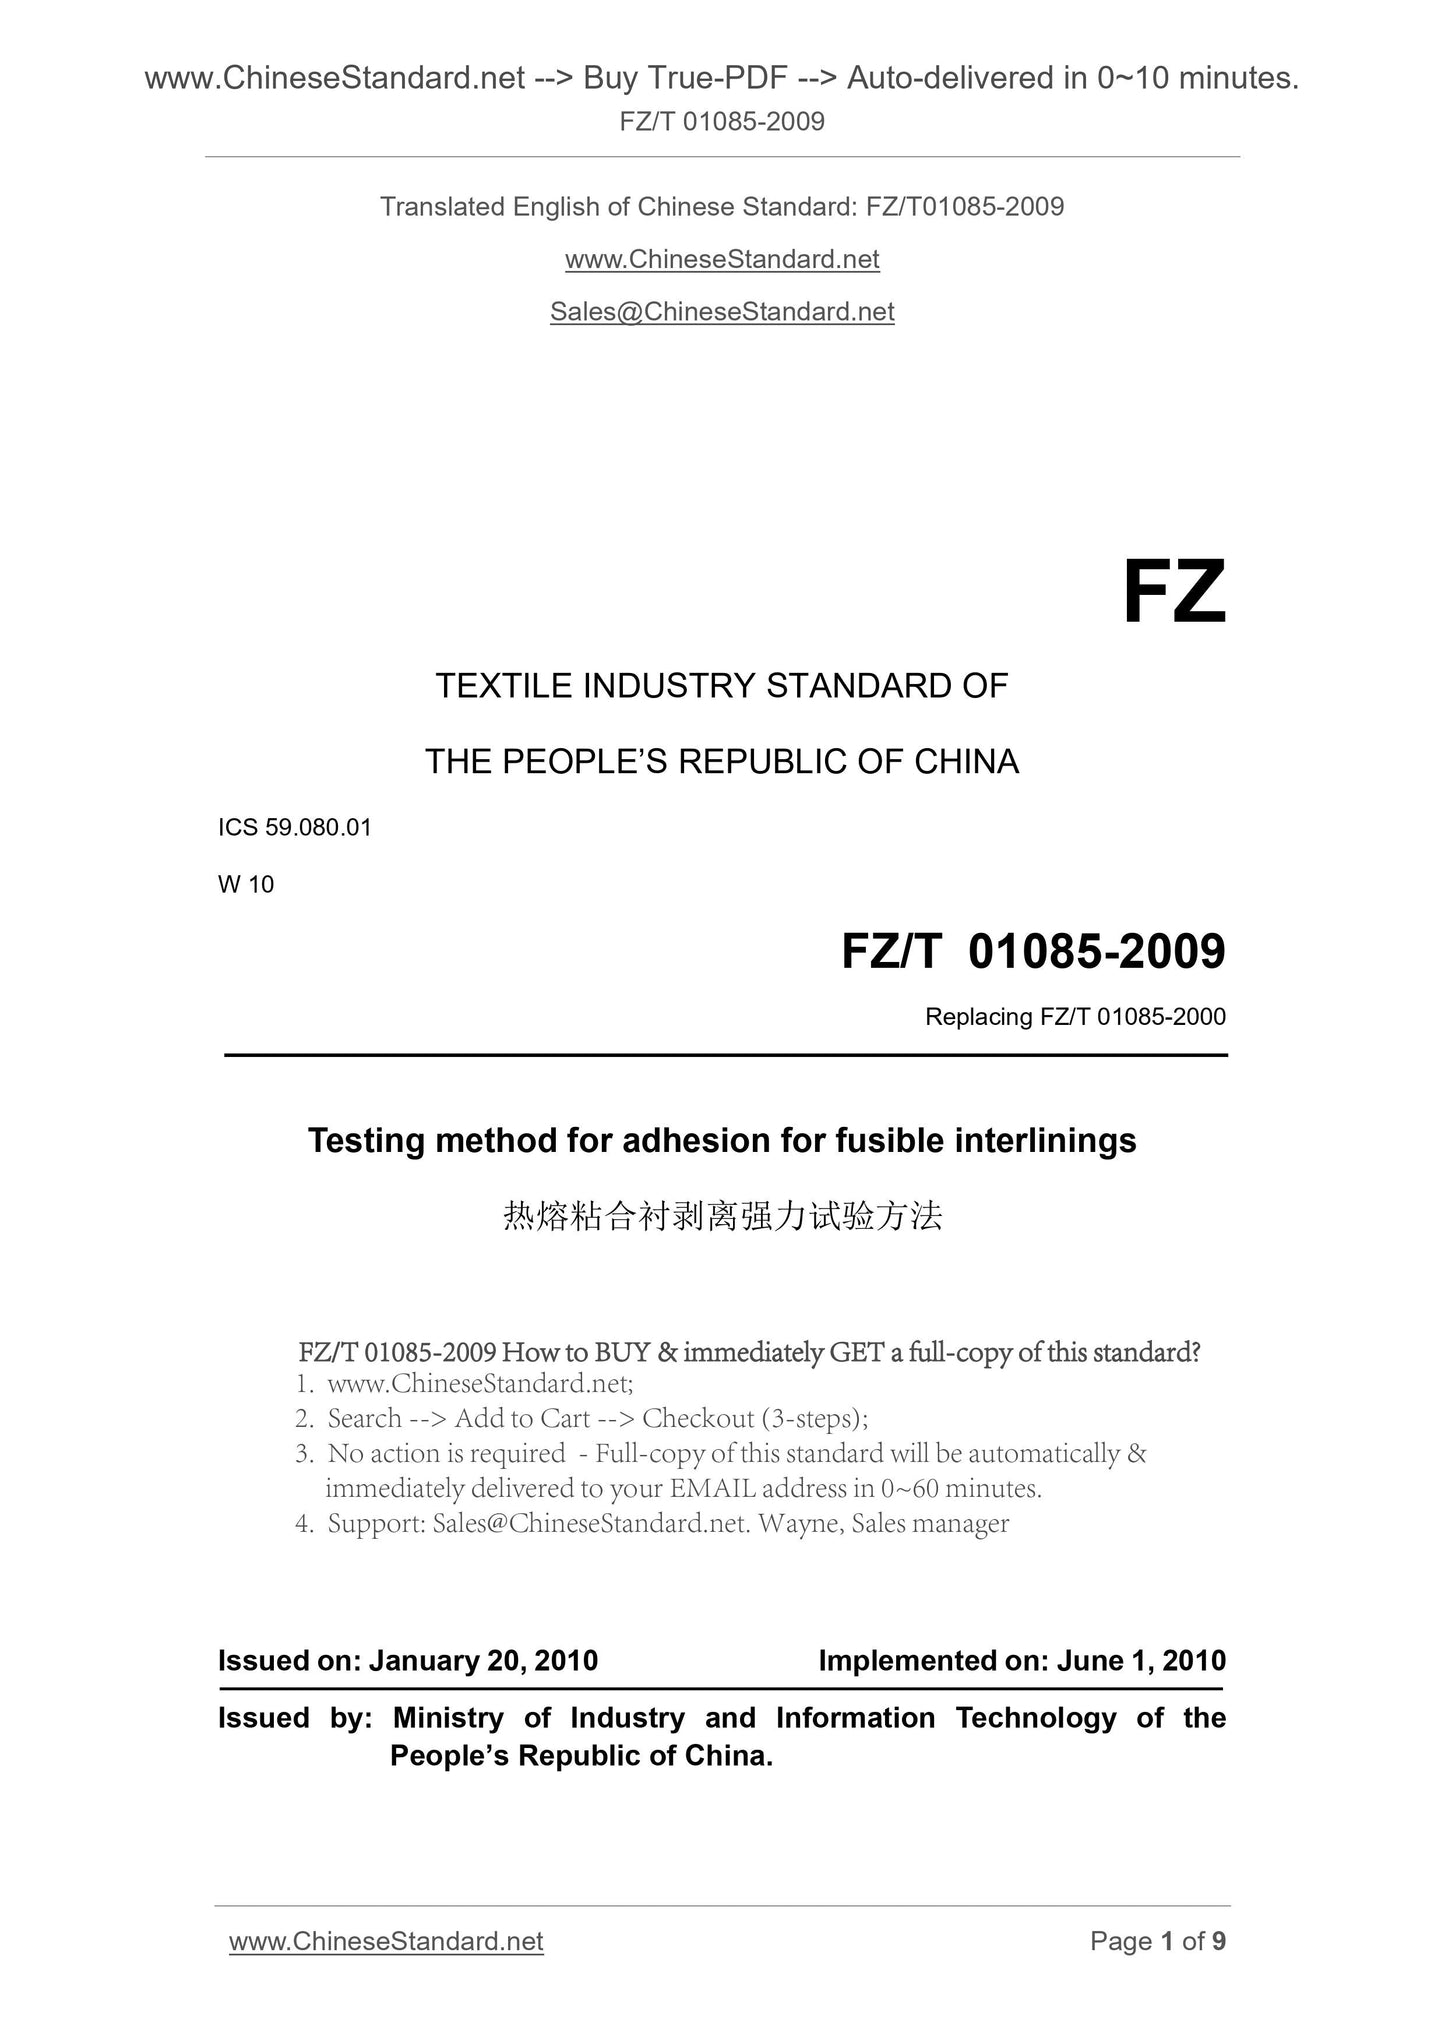 FZ/T 01085-2009 Page 1